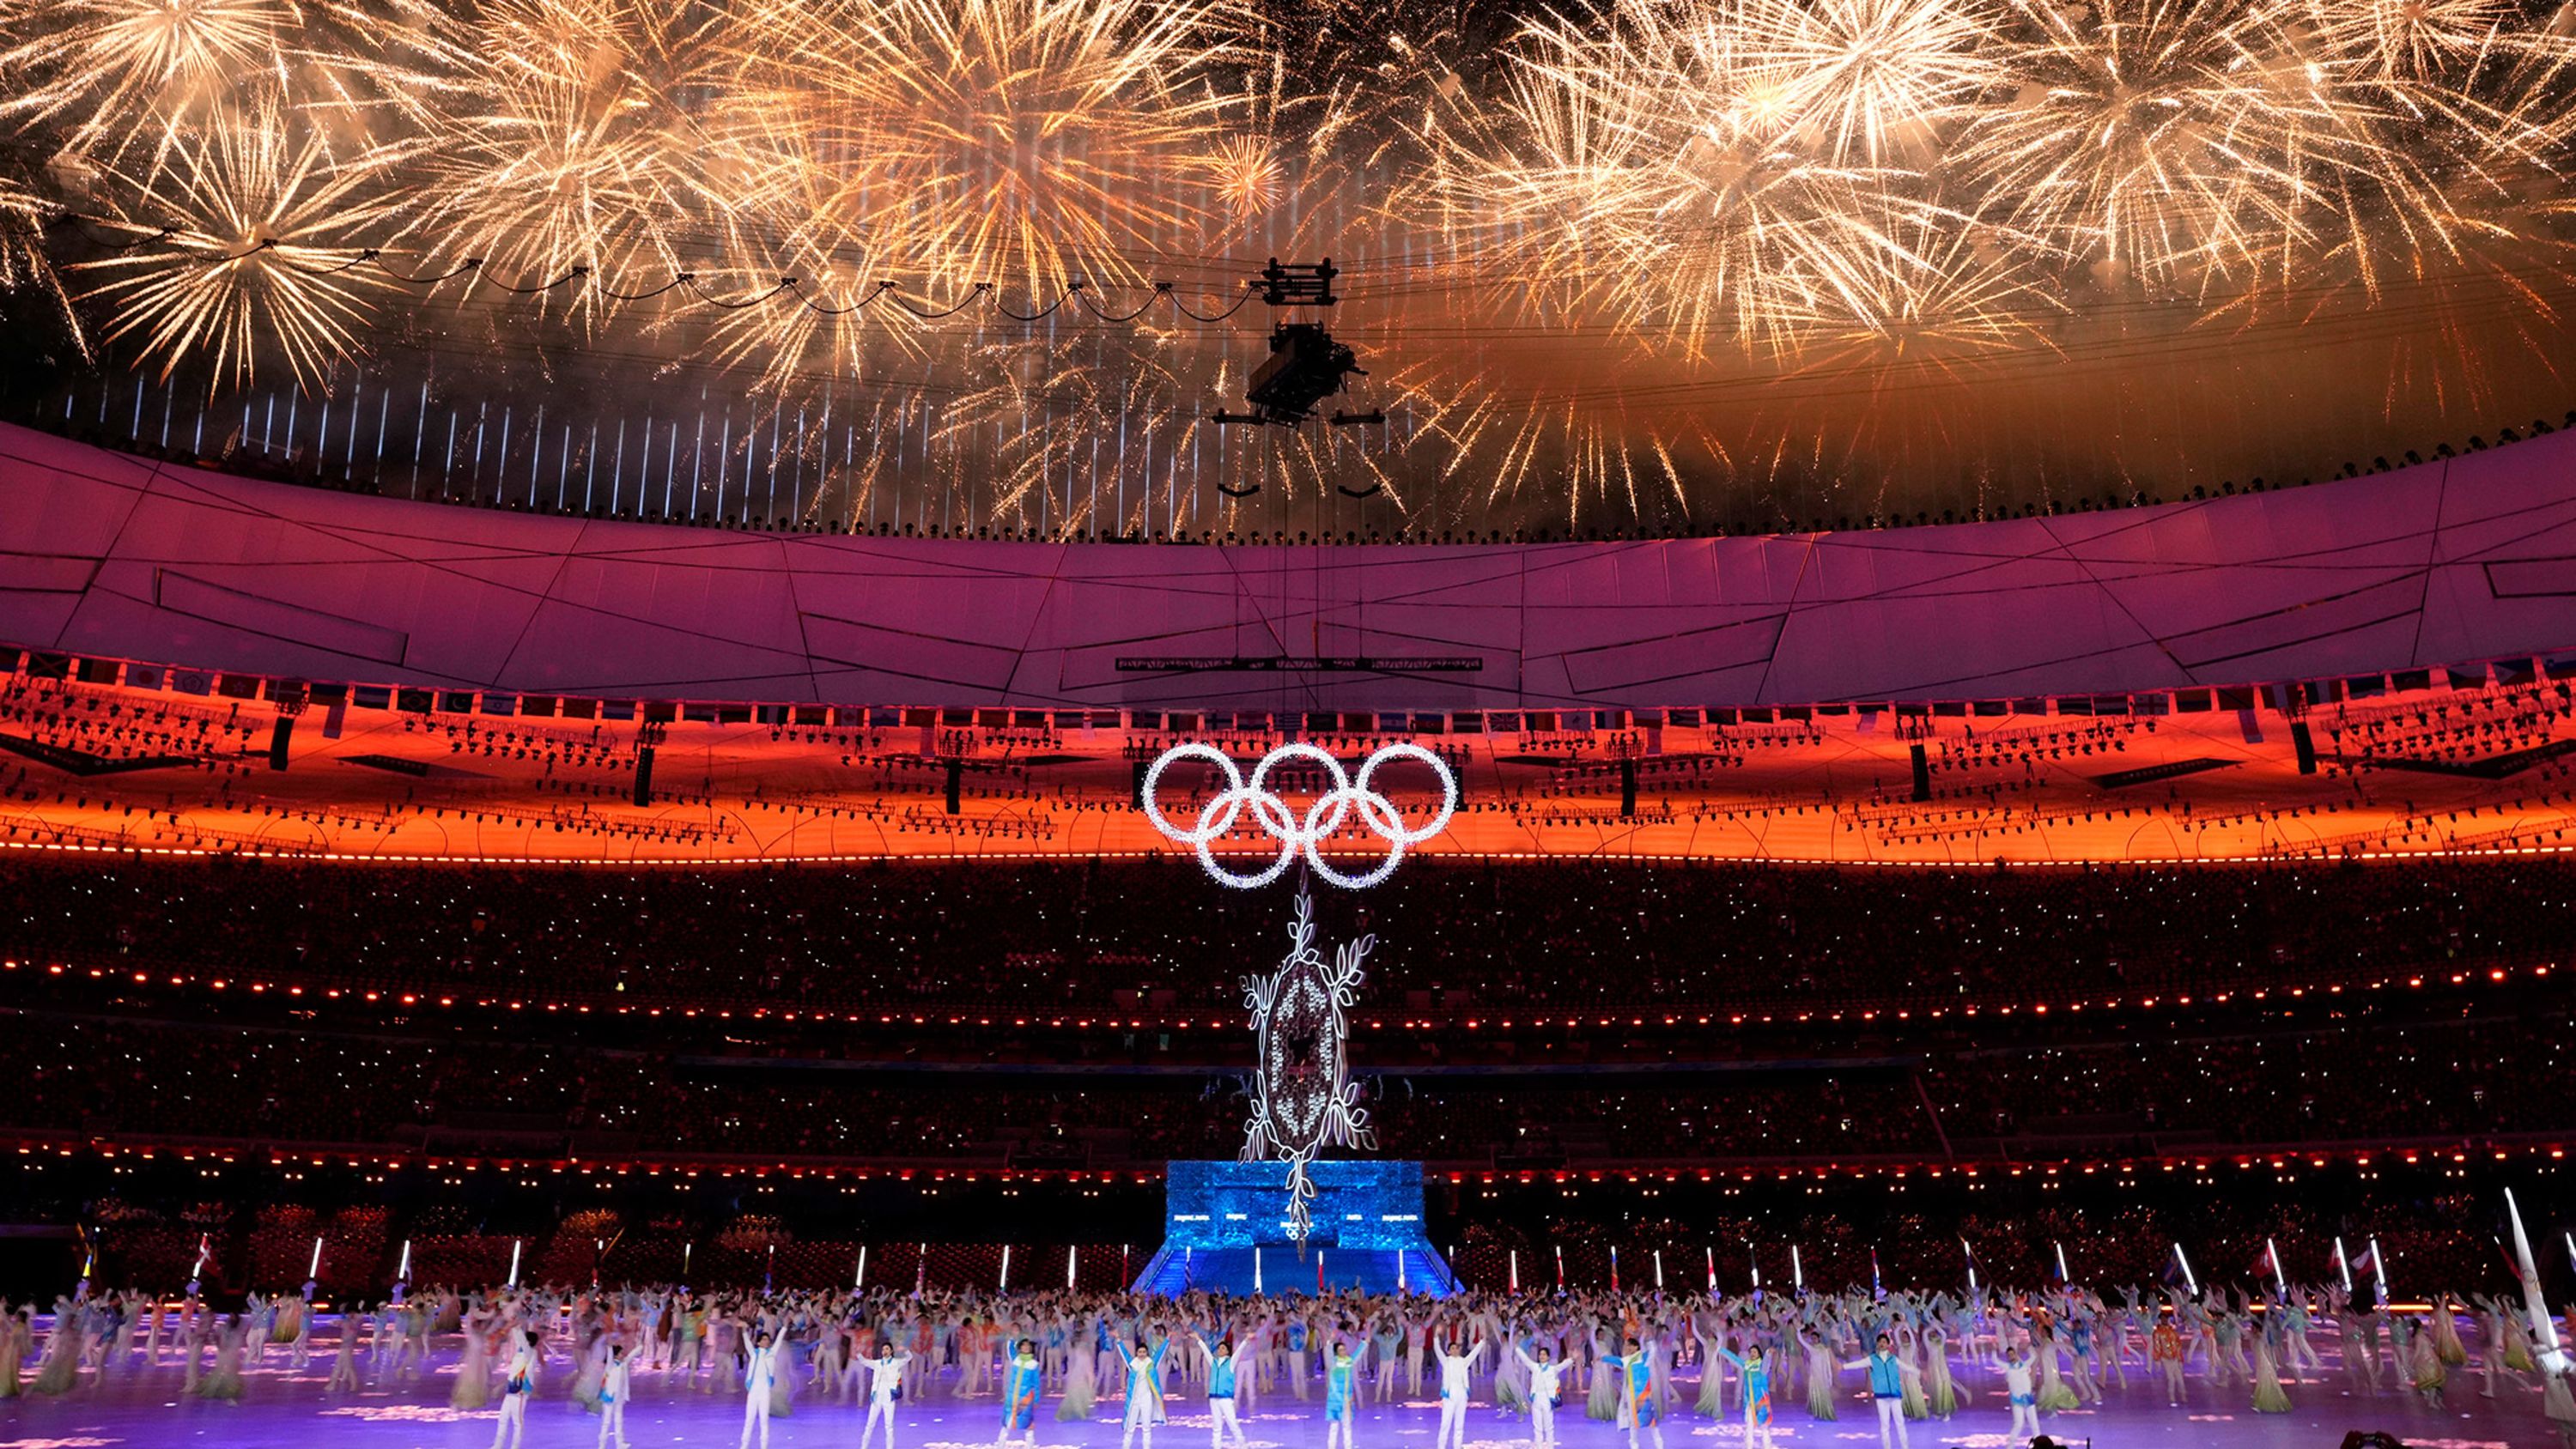 Fireworks burst over the Beijing National Stadium at the end of the Olympics closing ceremony on Sunday, February 20.